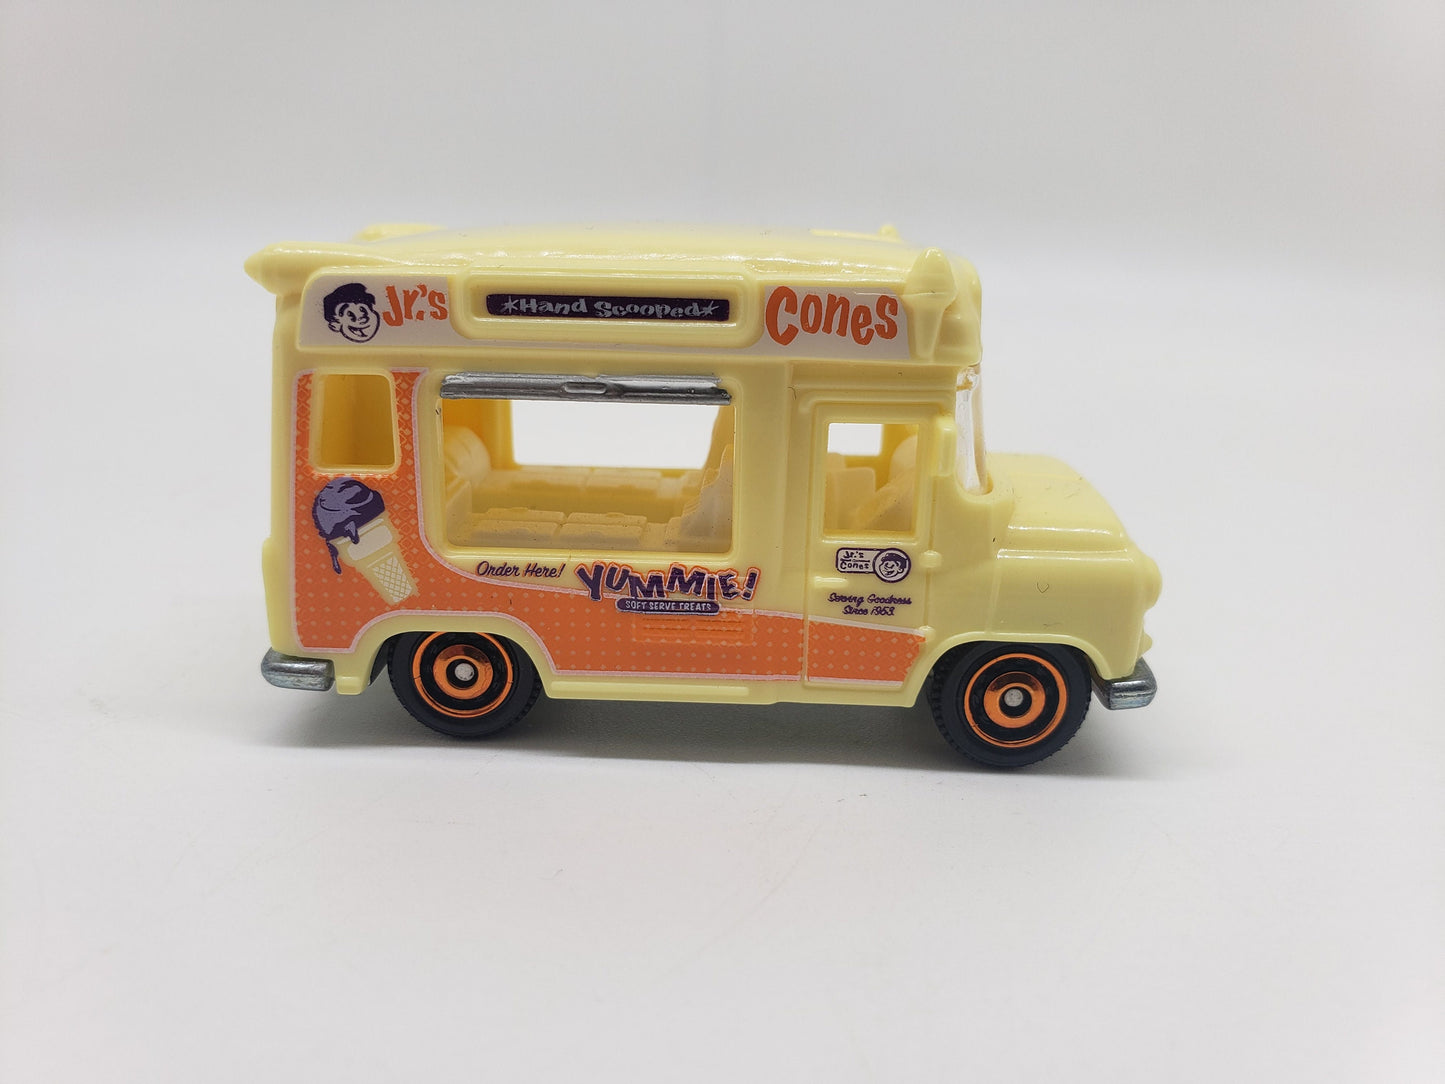 Matchbox Ice Cream Van Pale Yellow MBX Service Perfect Birthday Gift Miniature Collectable Scale Model Toy Car